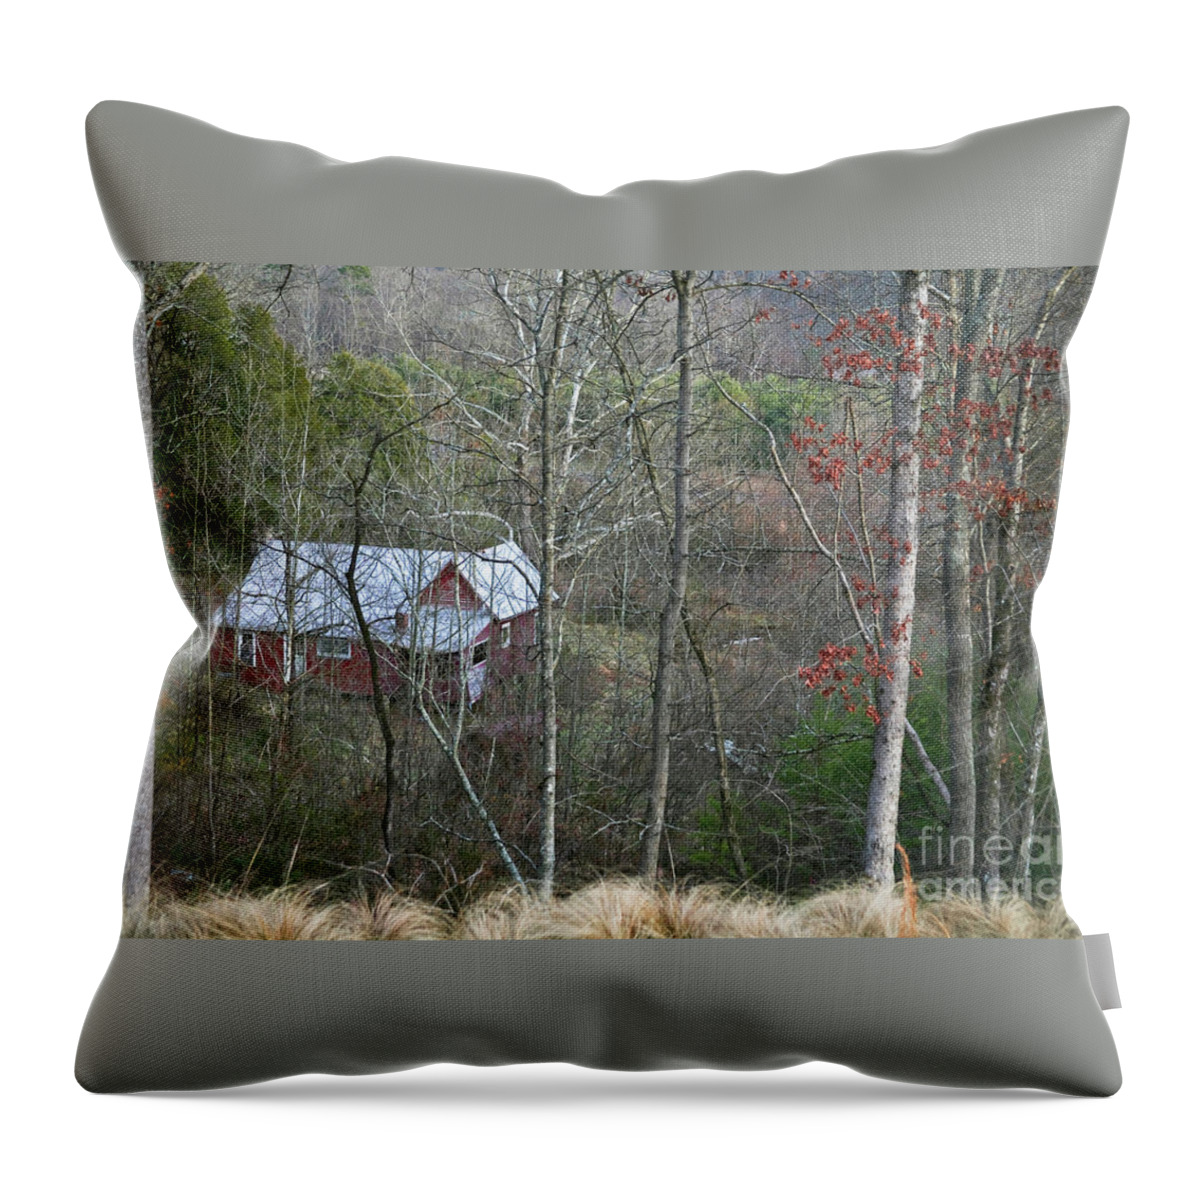 Retreat Throw Pillow featuring the photograph Retreat by Kathy Strauss